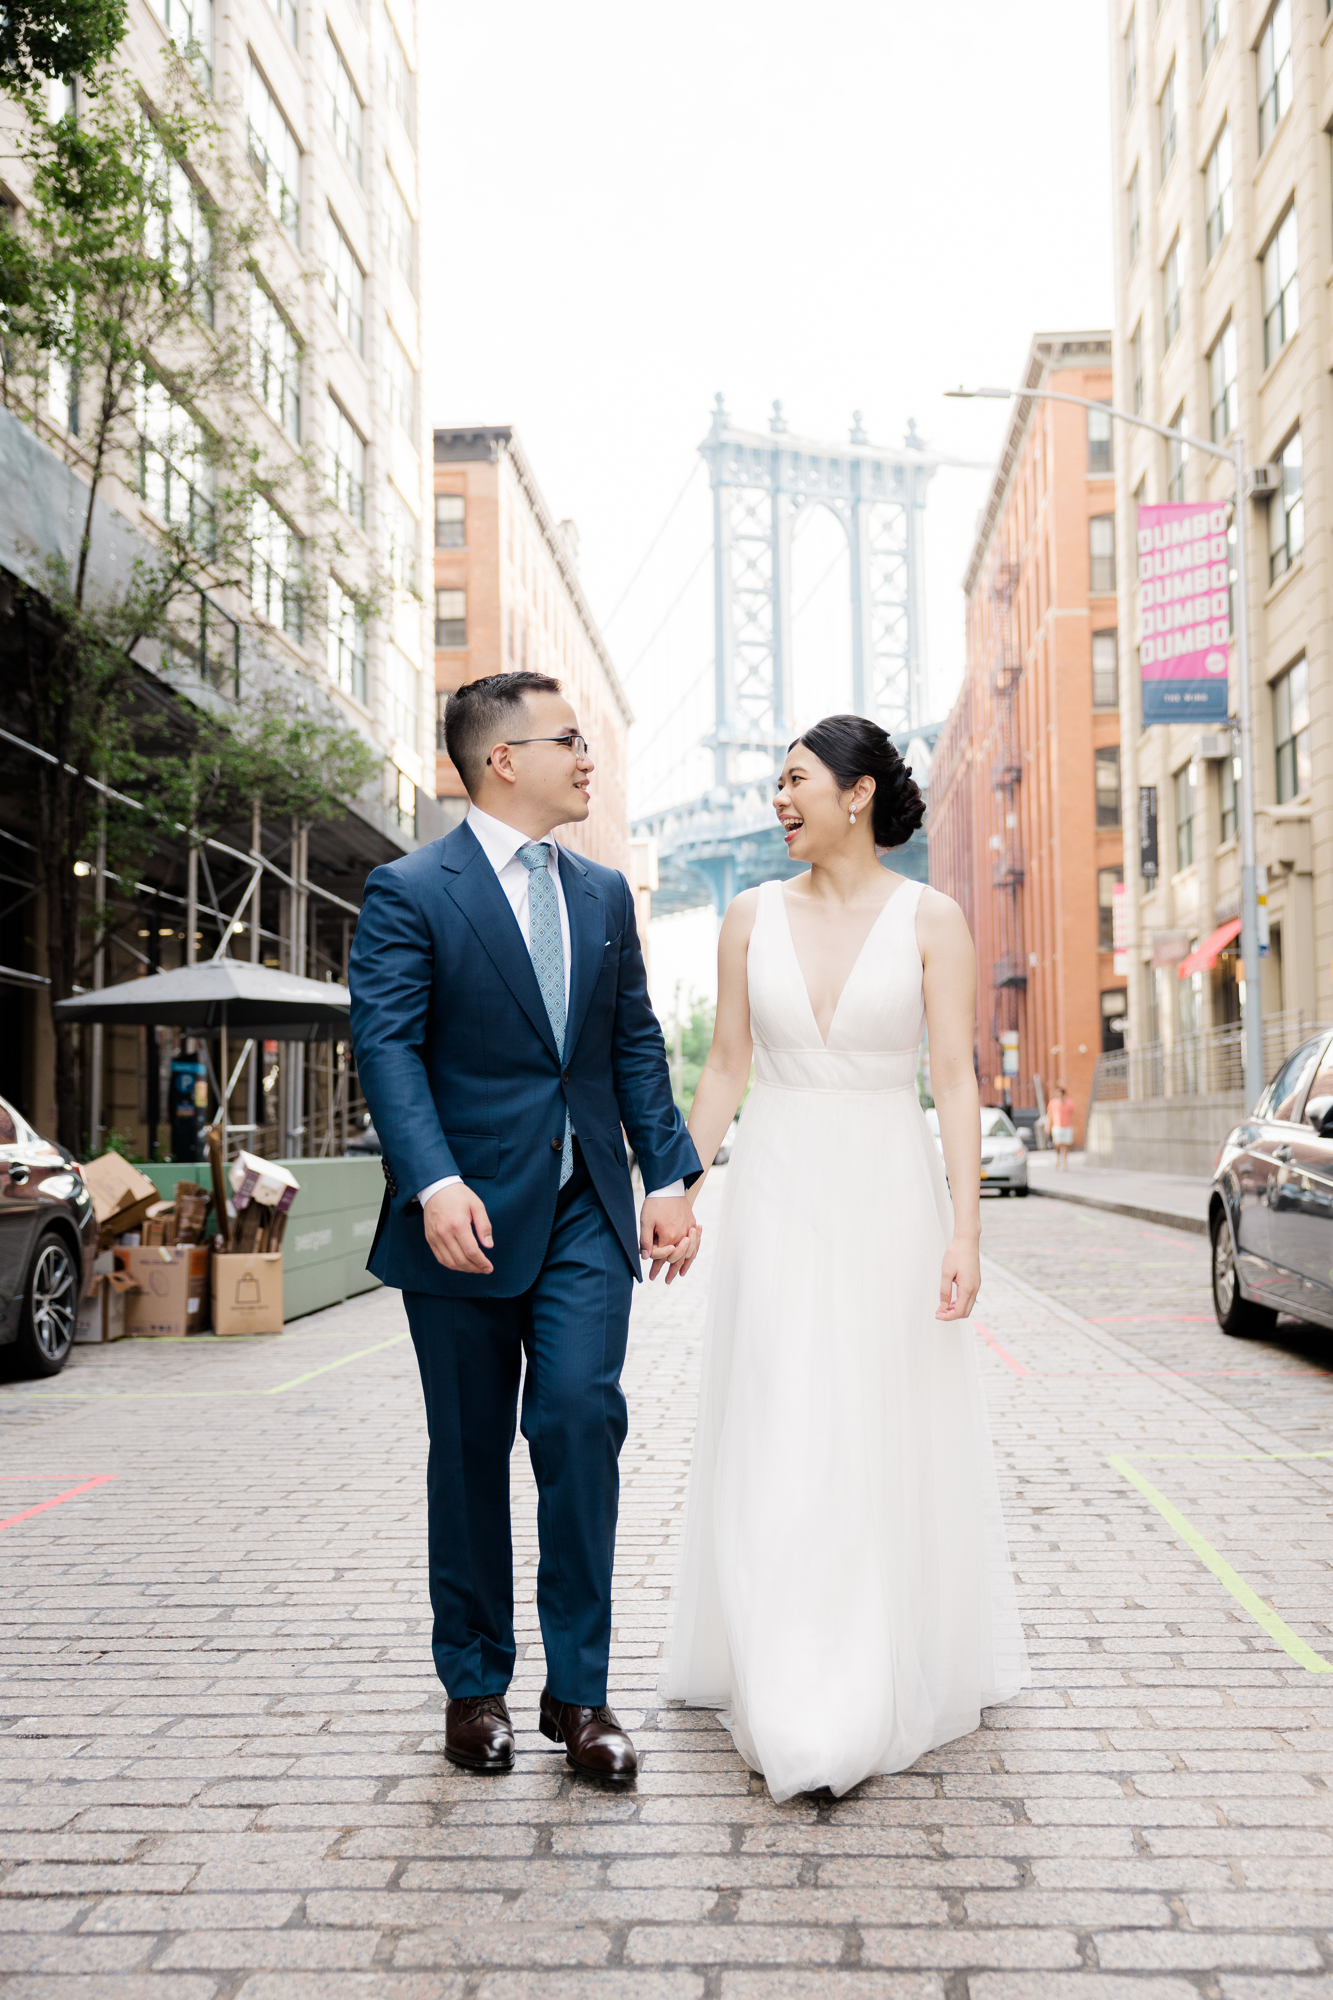 Amazing Photos of New York Elopement in DUMBO and Central Park